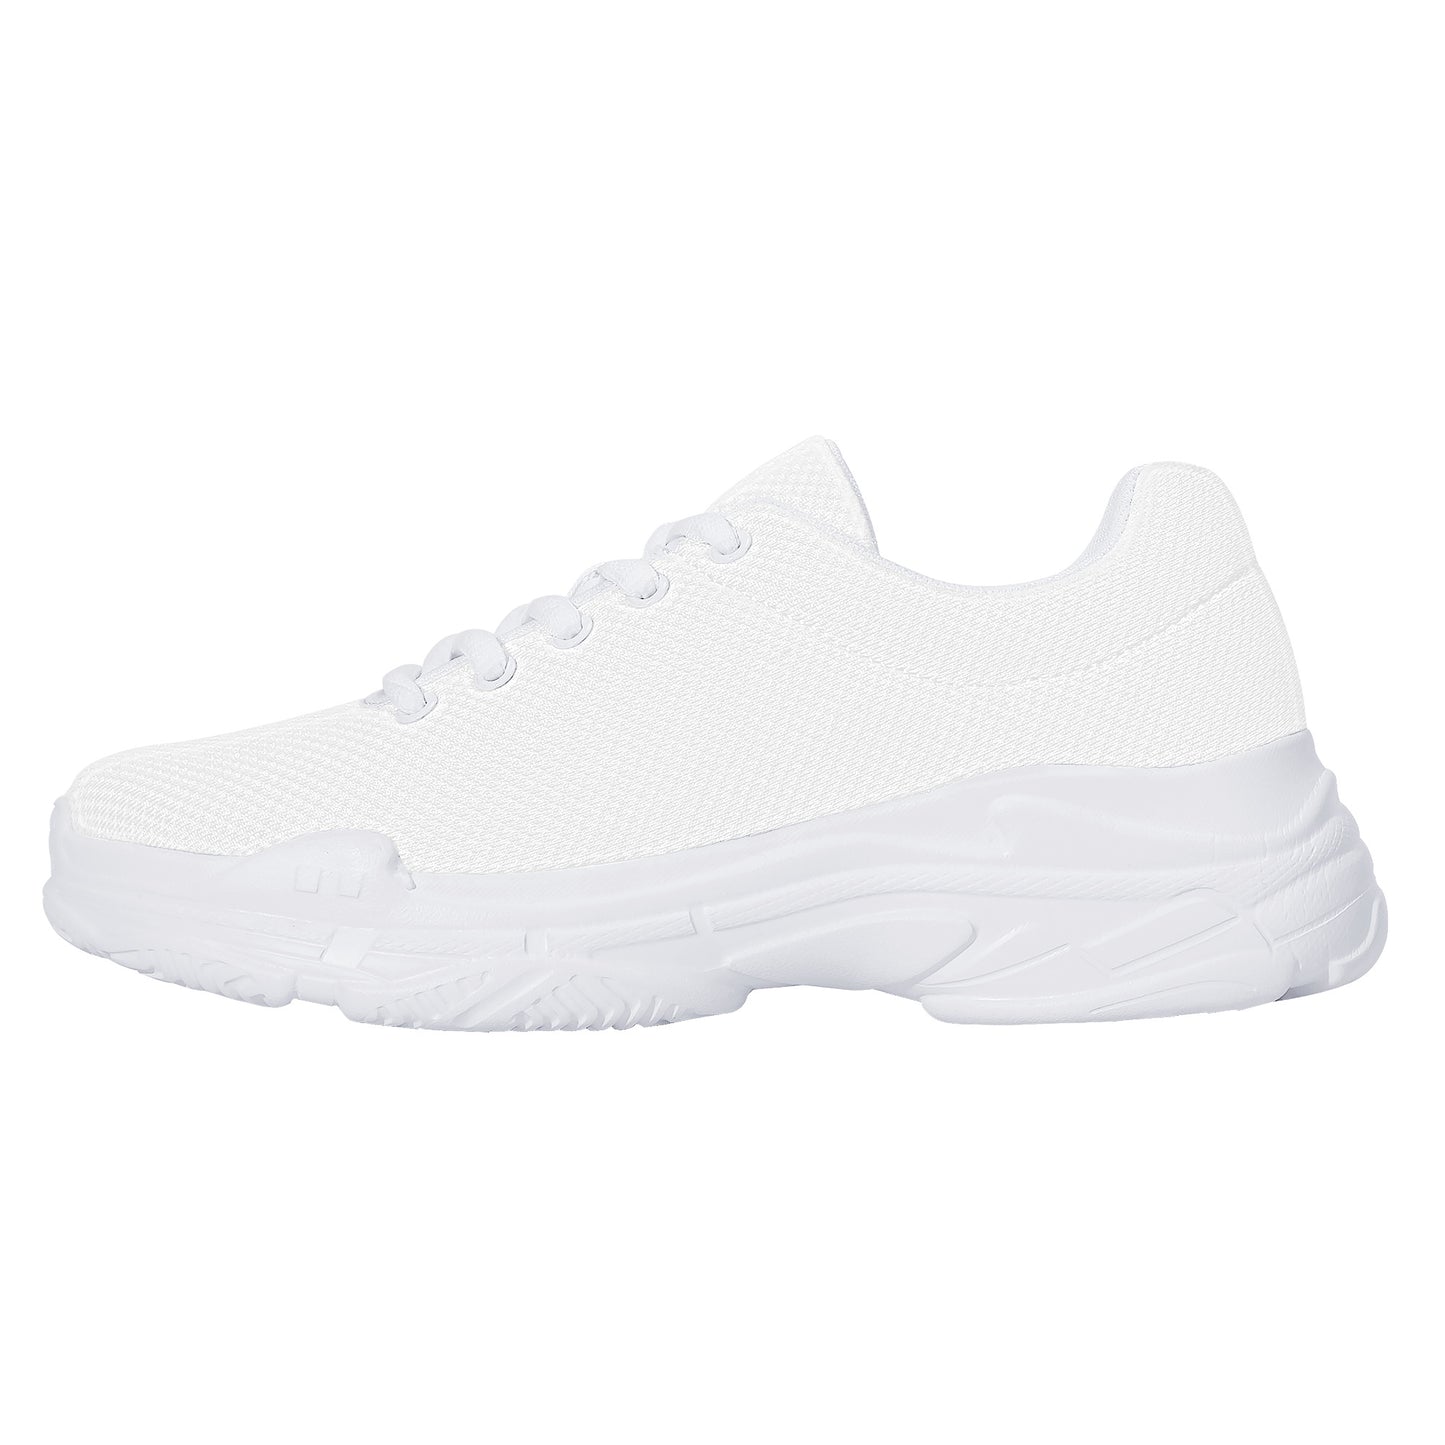 Create Your Own - Chunky Sneakers - White